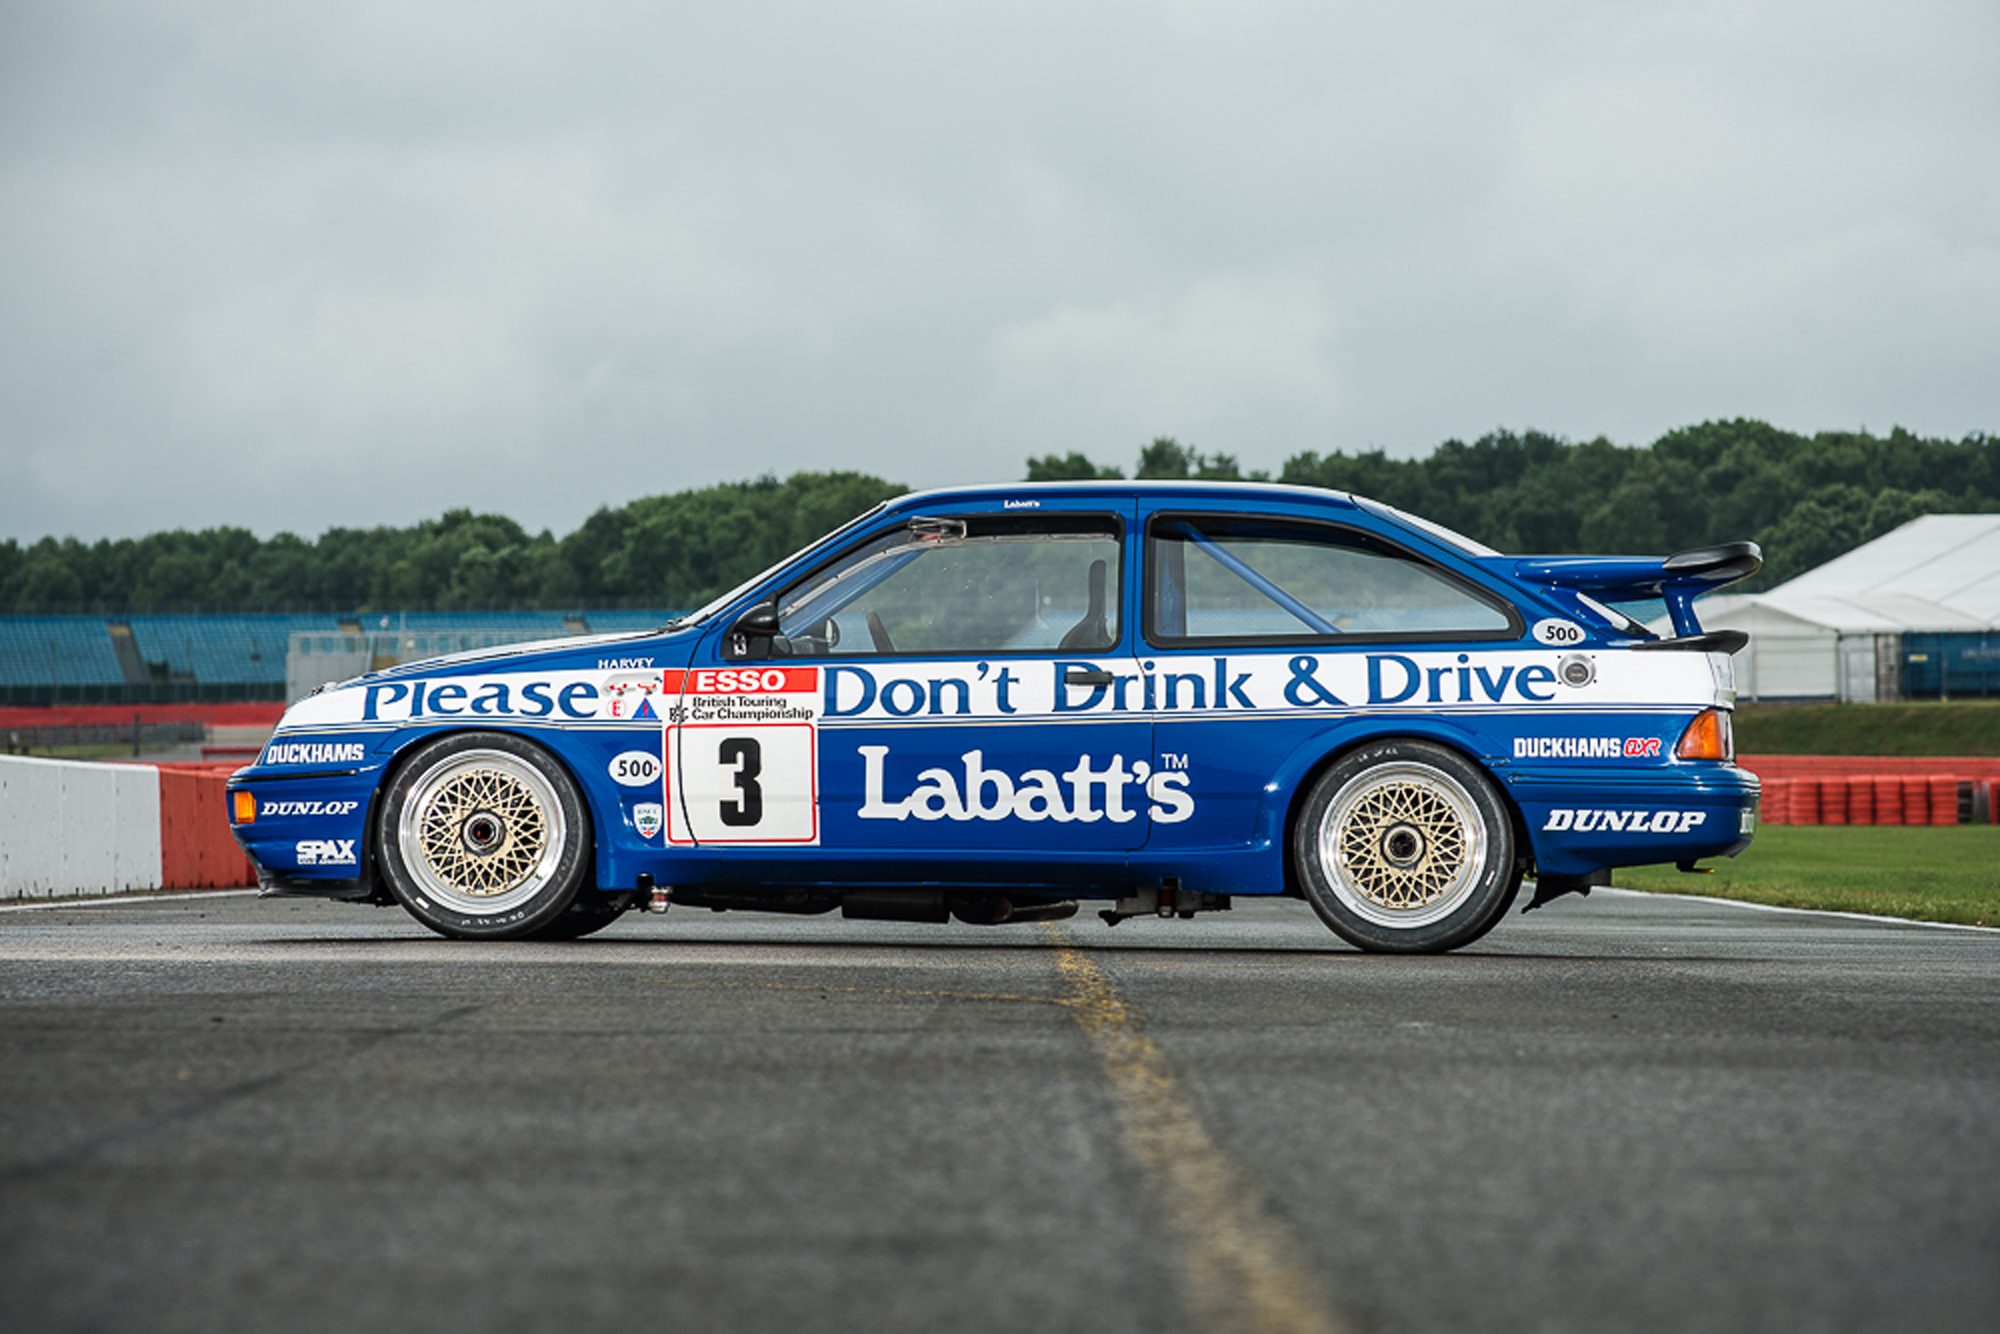 Ford, Ford RS Cosworth, Sierra RS Cosworth, RS500, Cosworth, BTCC, RS500 Labatts